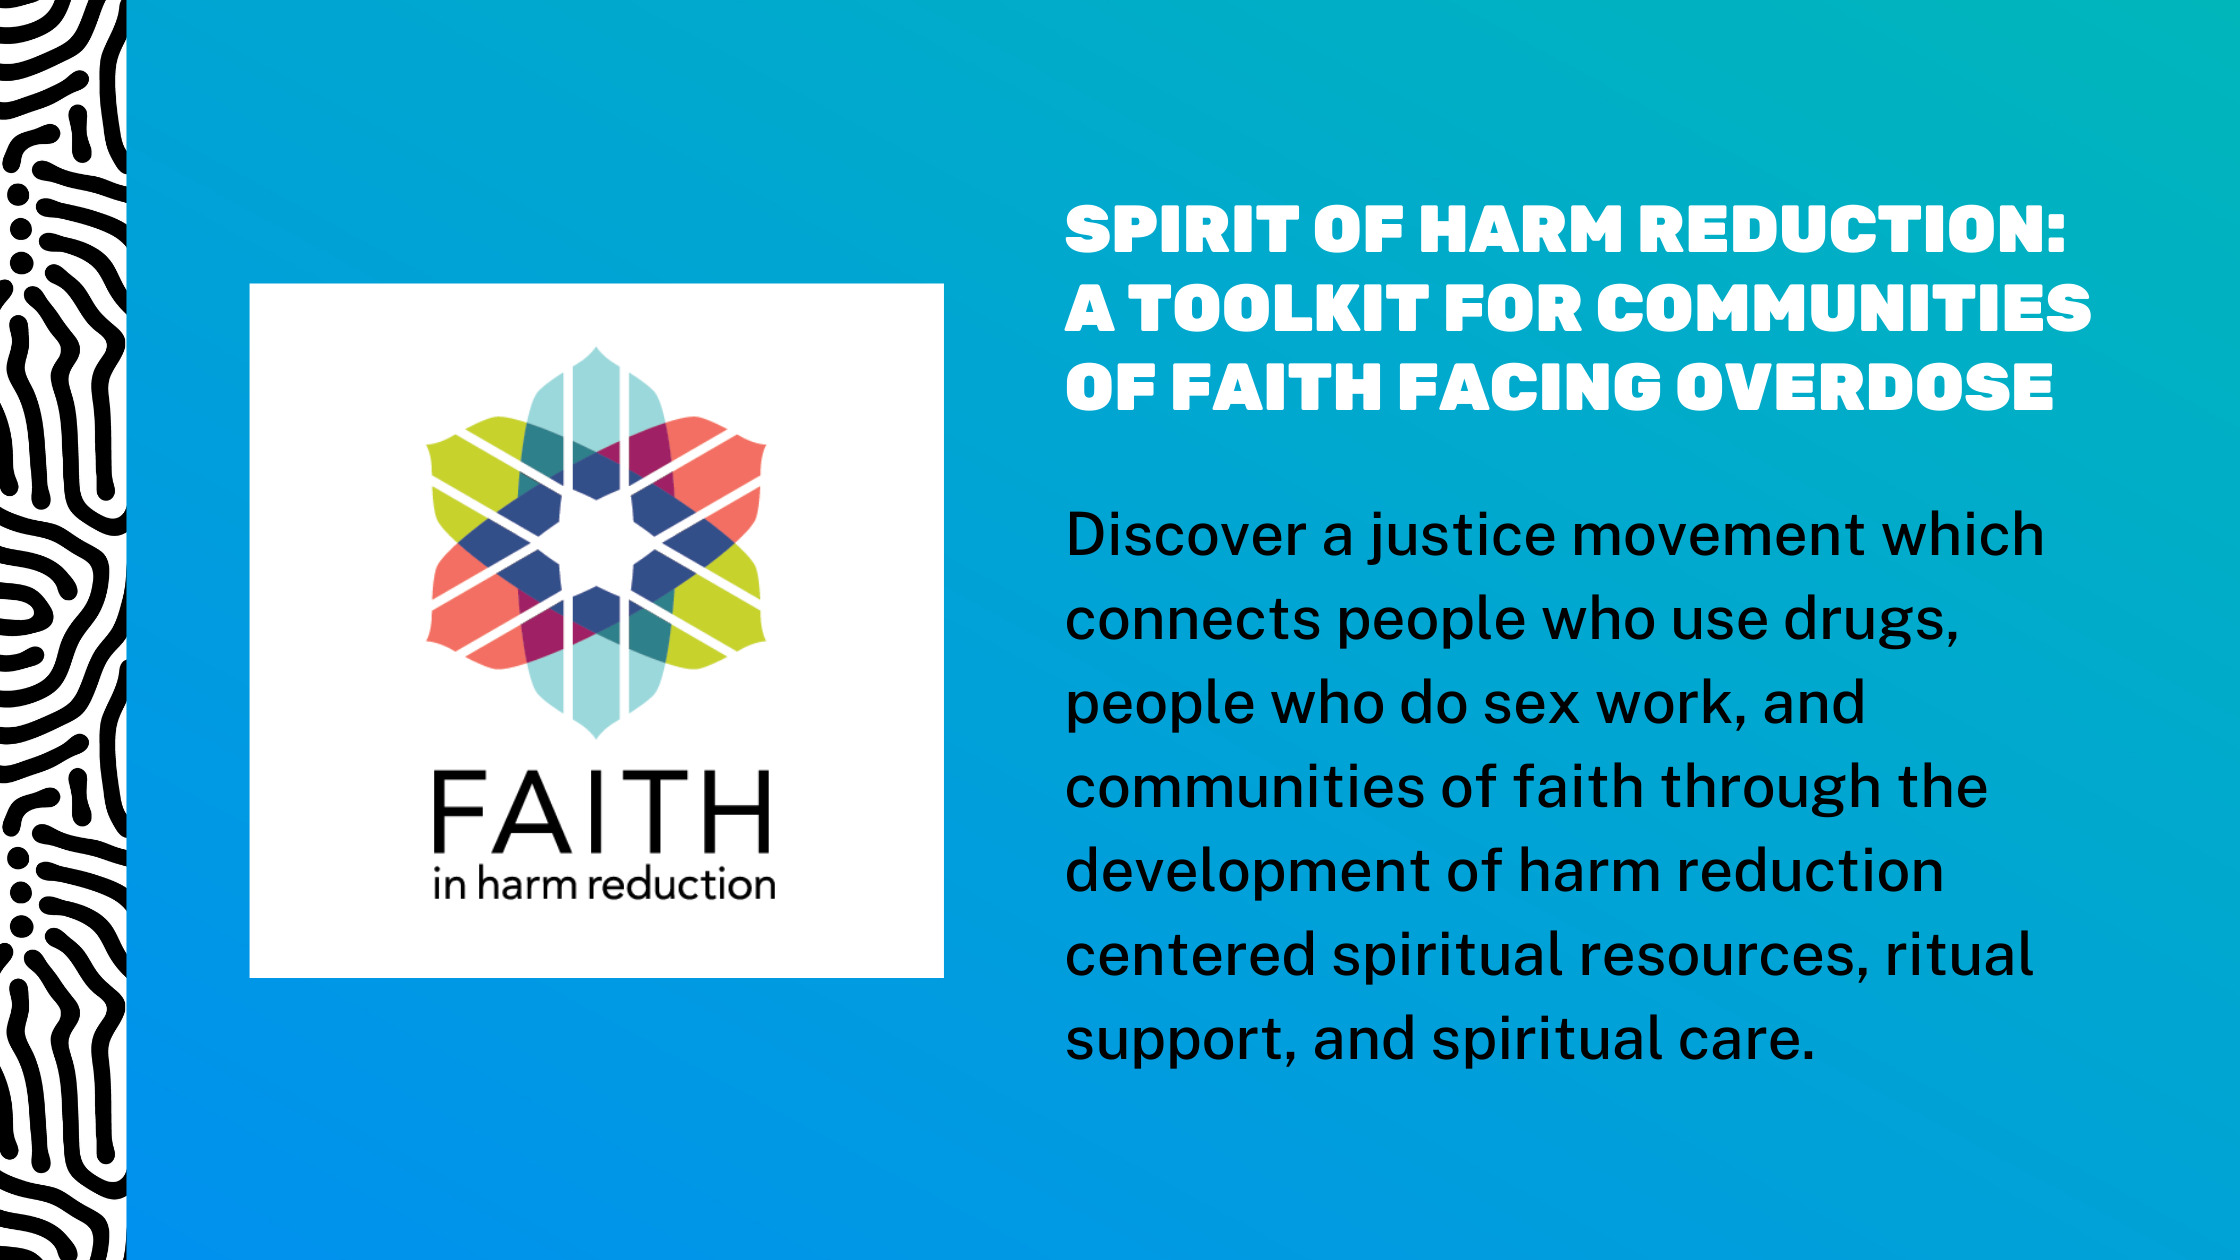 Spirit of Harm Reduction: A Toolkit for Communities of Faith